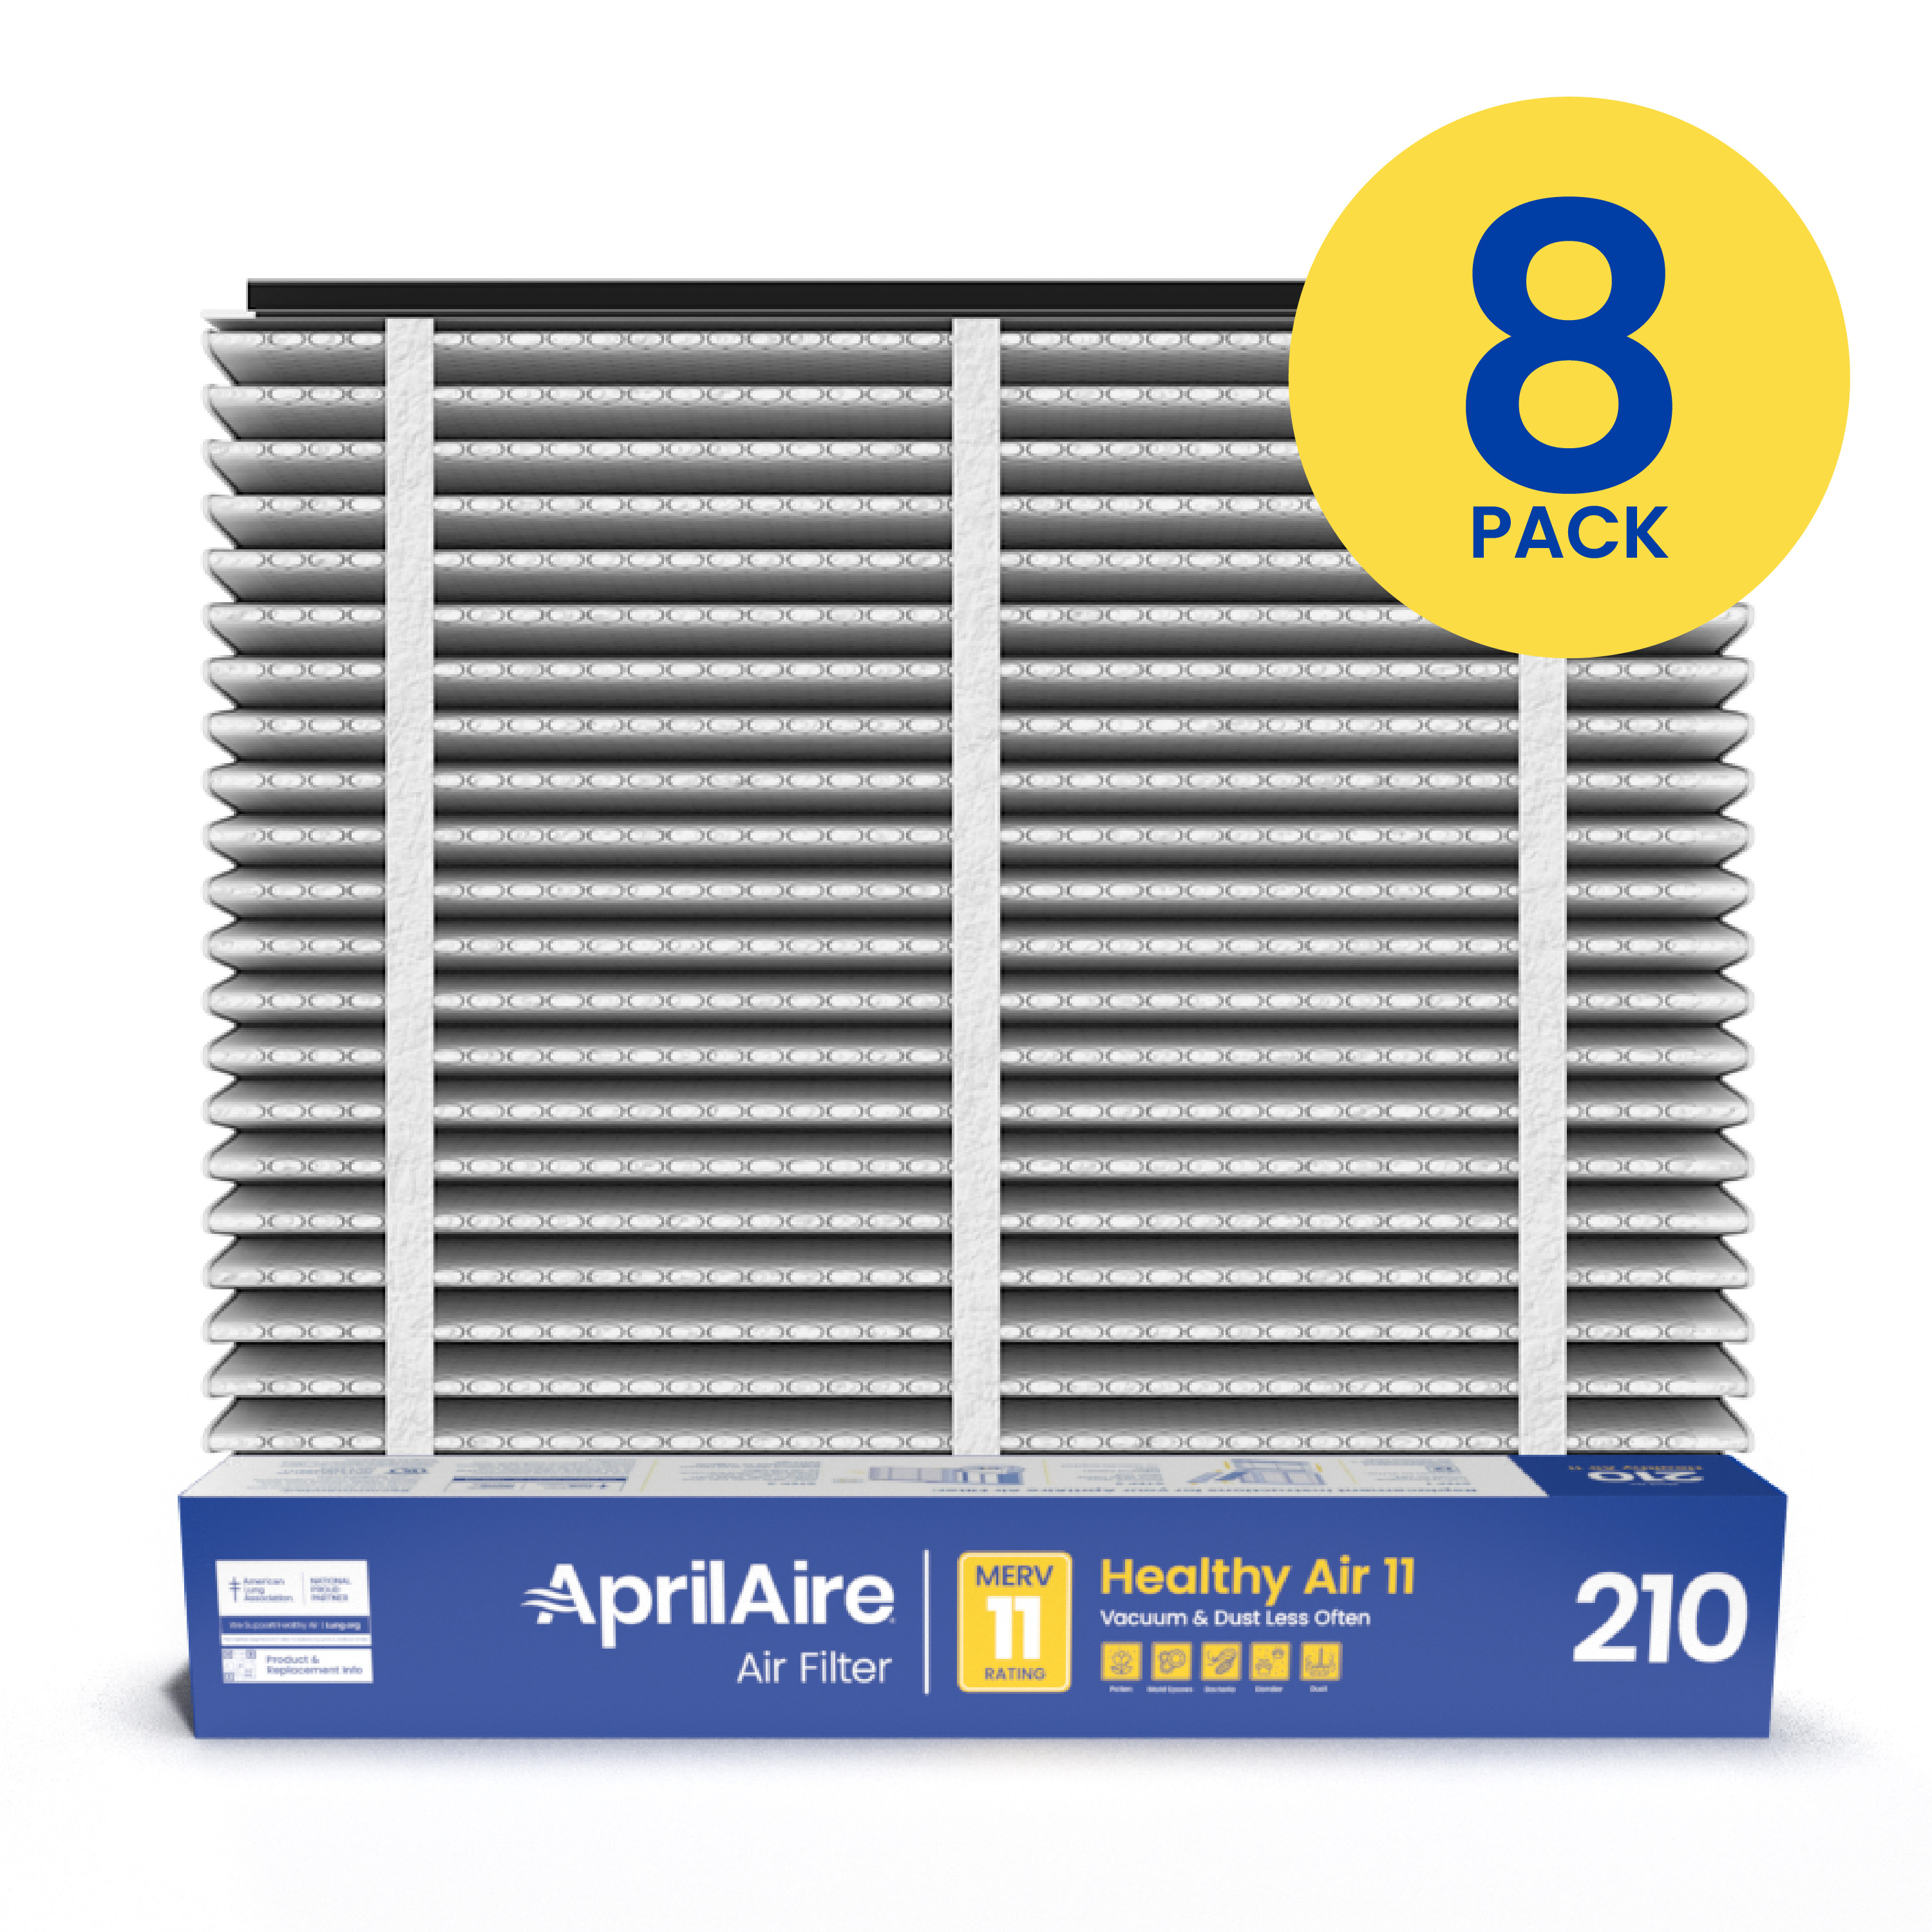 Aprilaire 210 Replacement Air Filter - 8 Pack (Case) - image 3 of 17